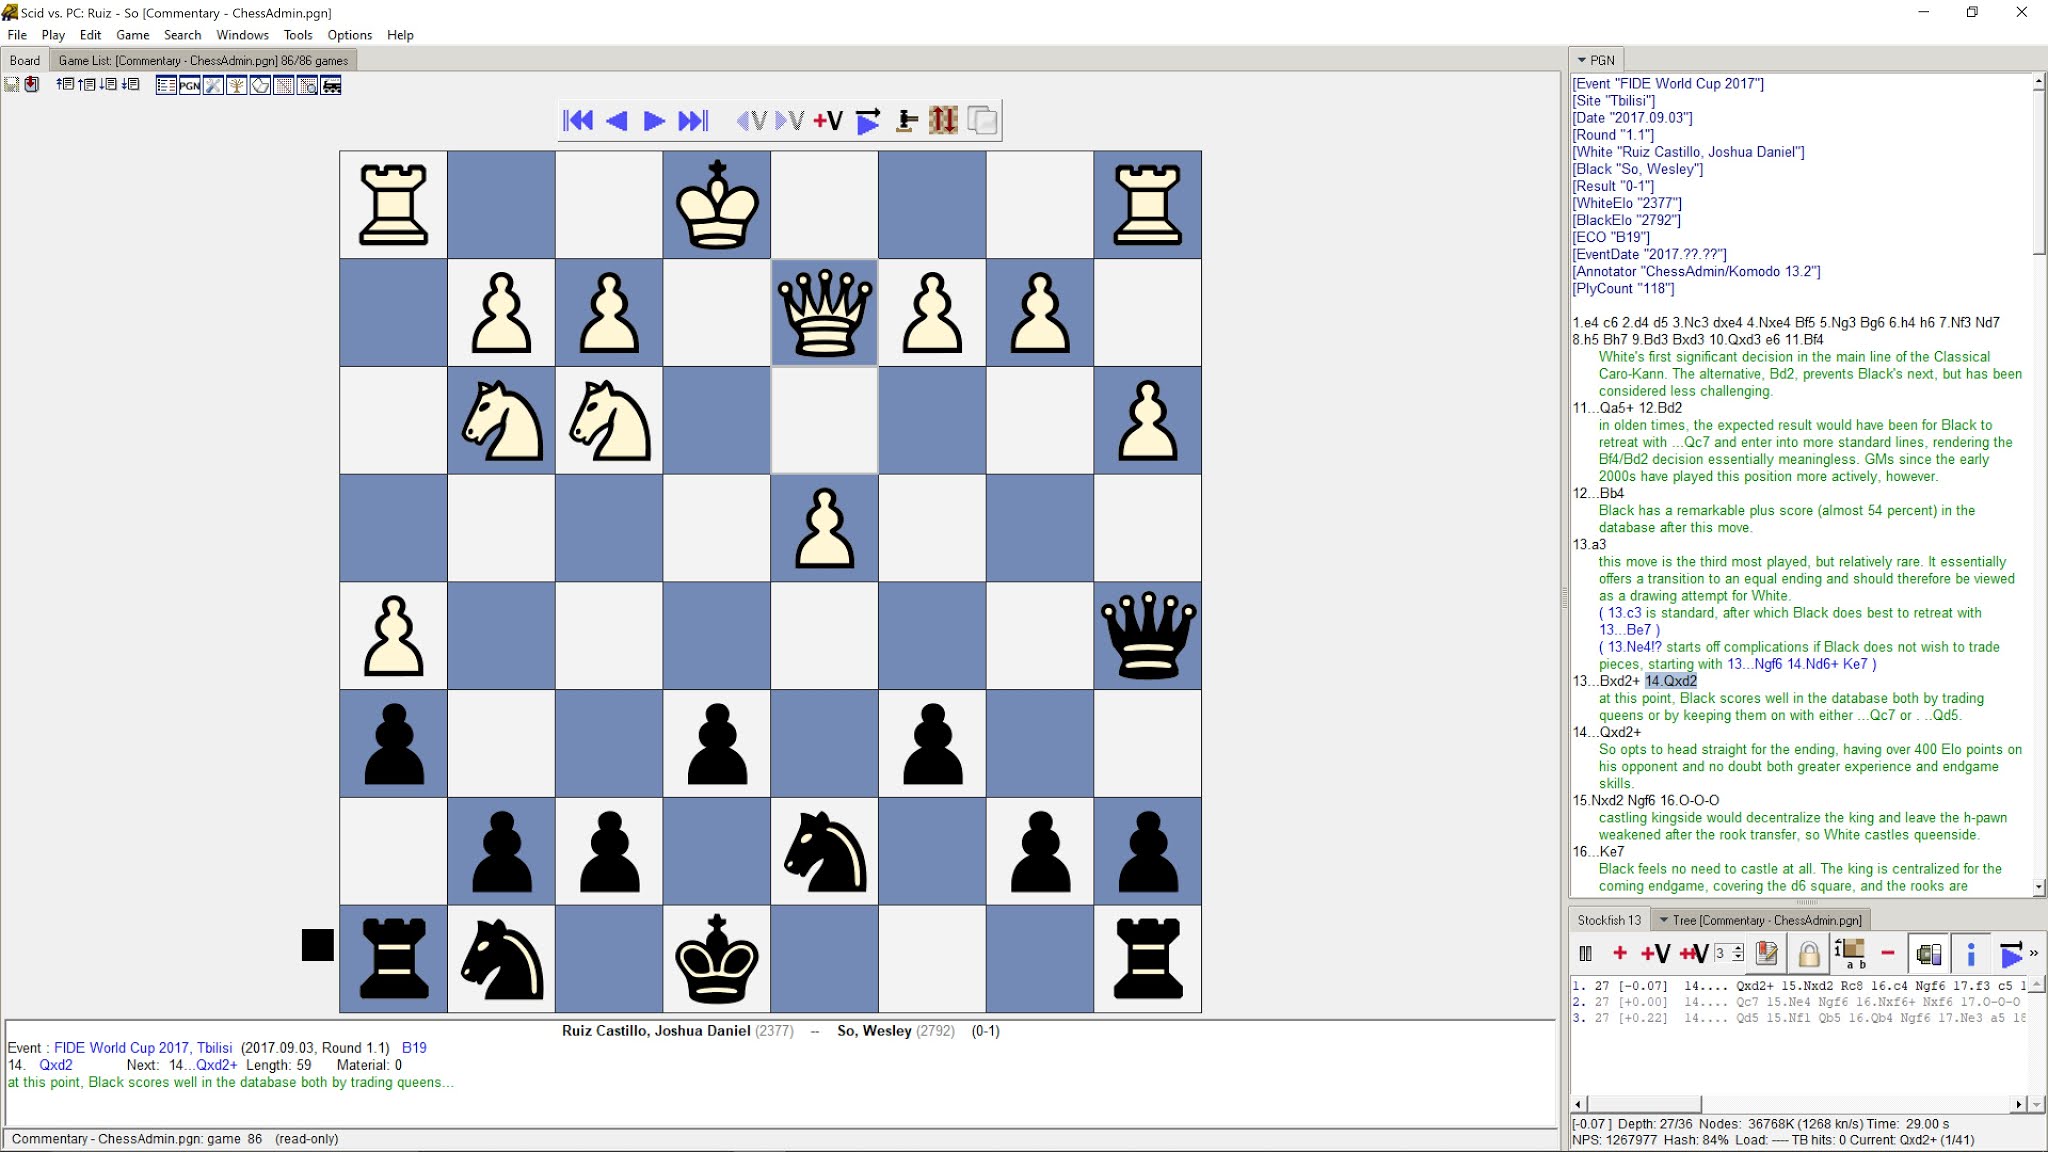 Using ChessBase on your Mac computer